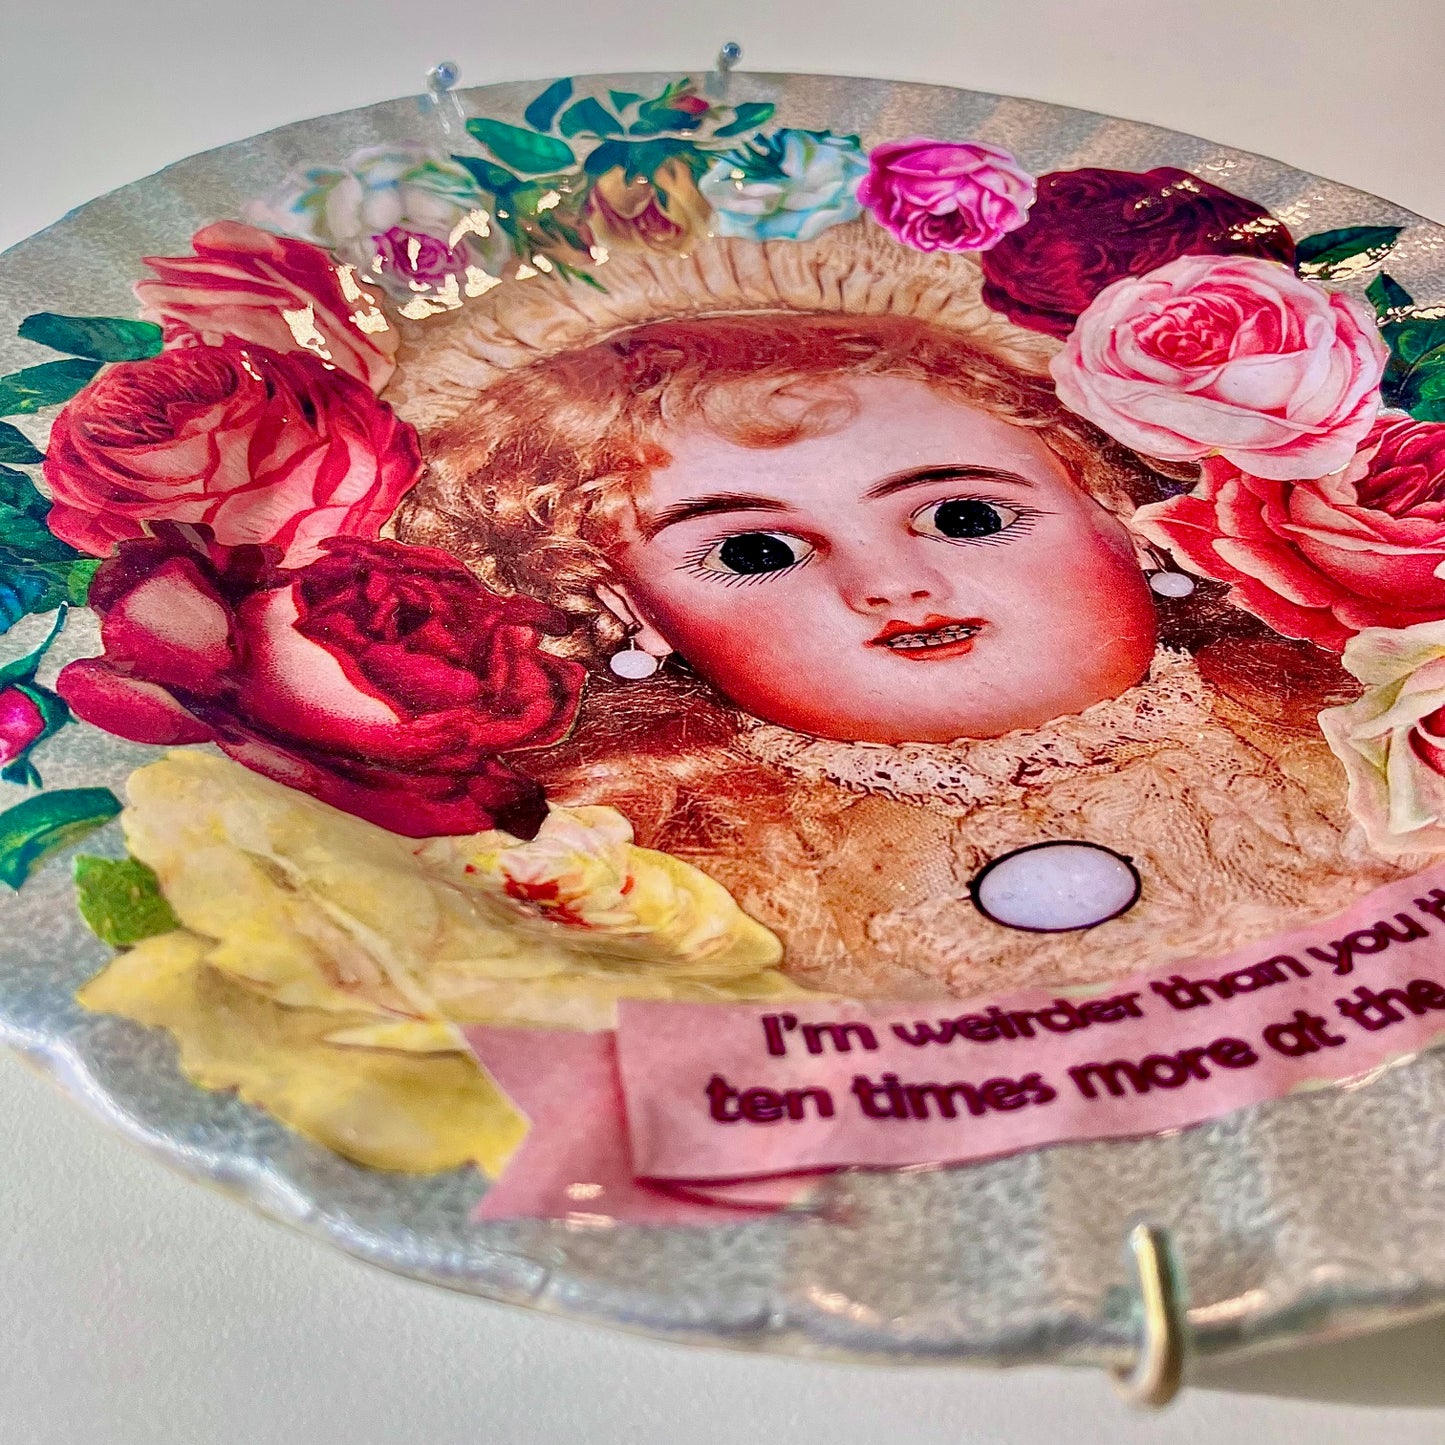 Silver Upcycled Wall Plate "I'm Weirder Than You Think Ten Times More At The Very Least" - by House of Frisson